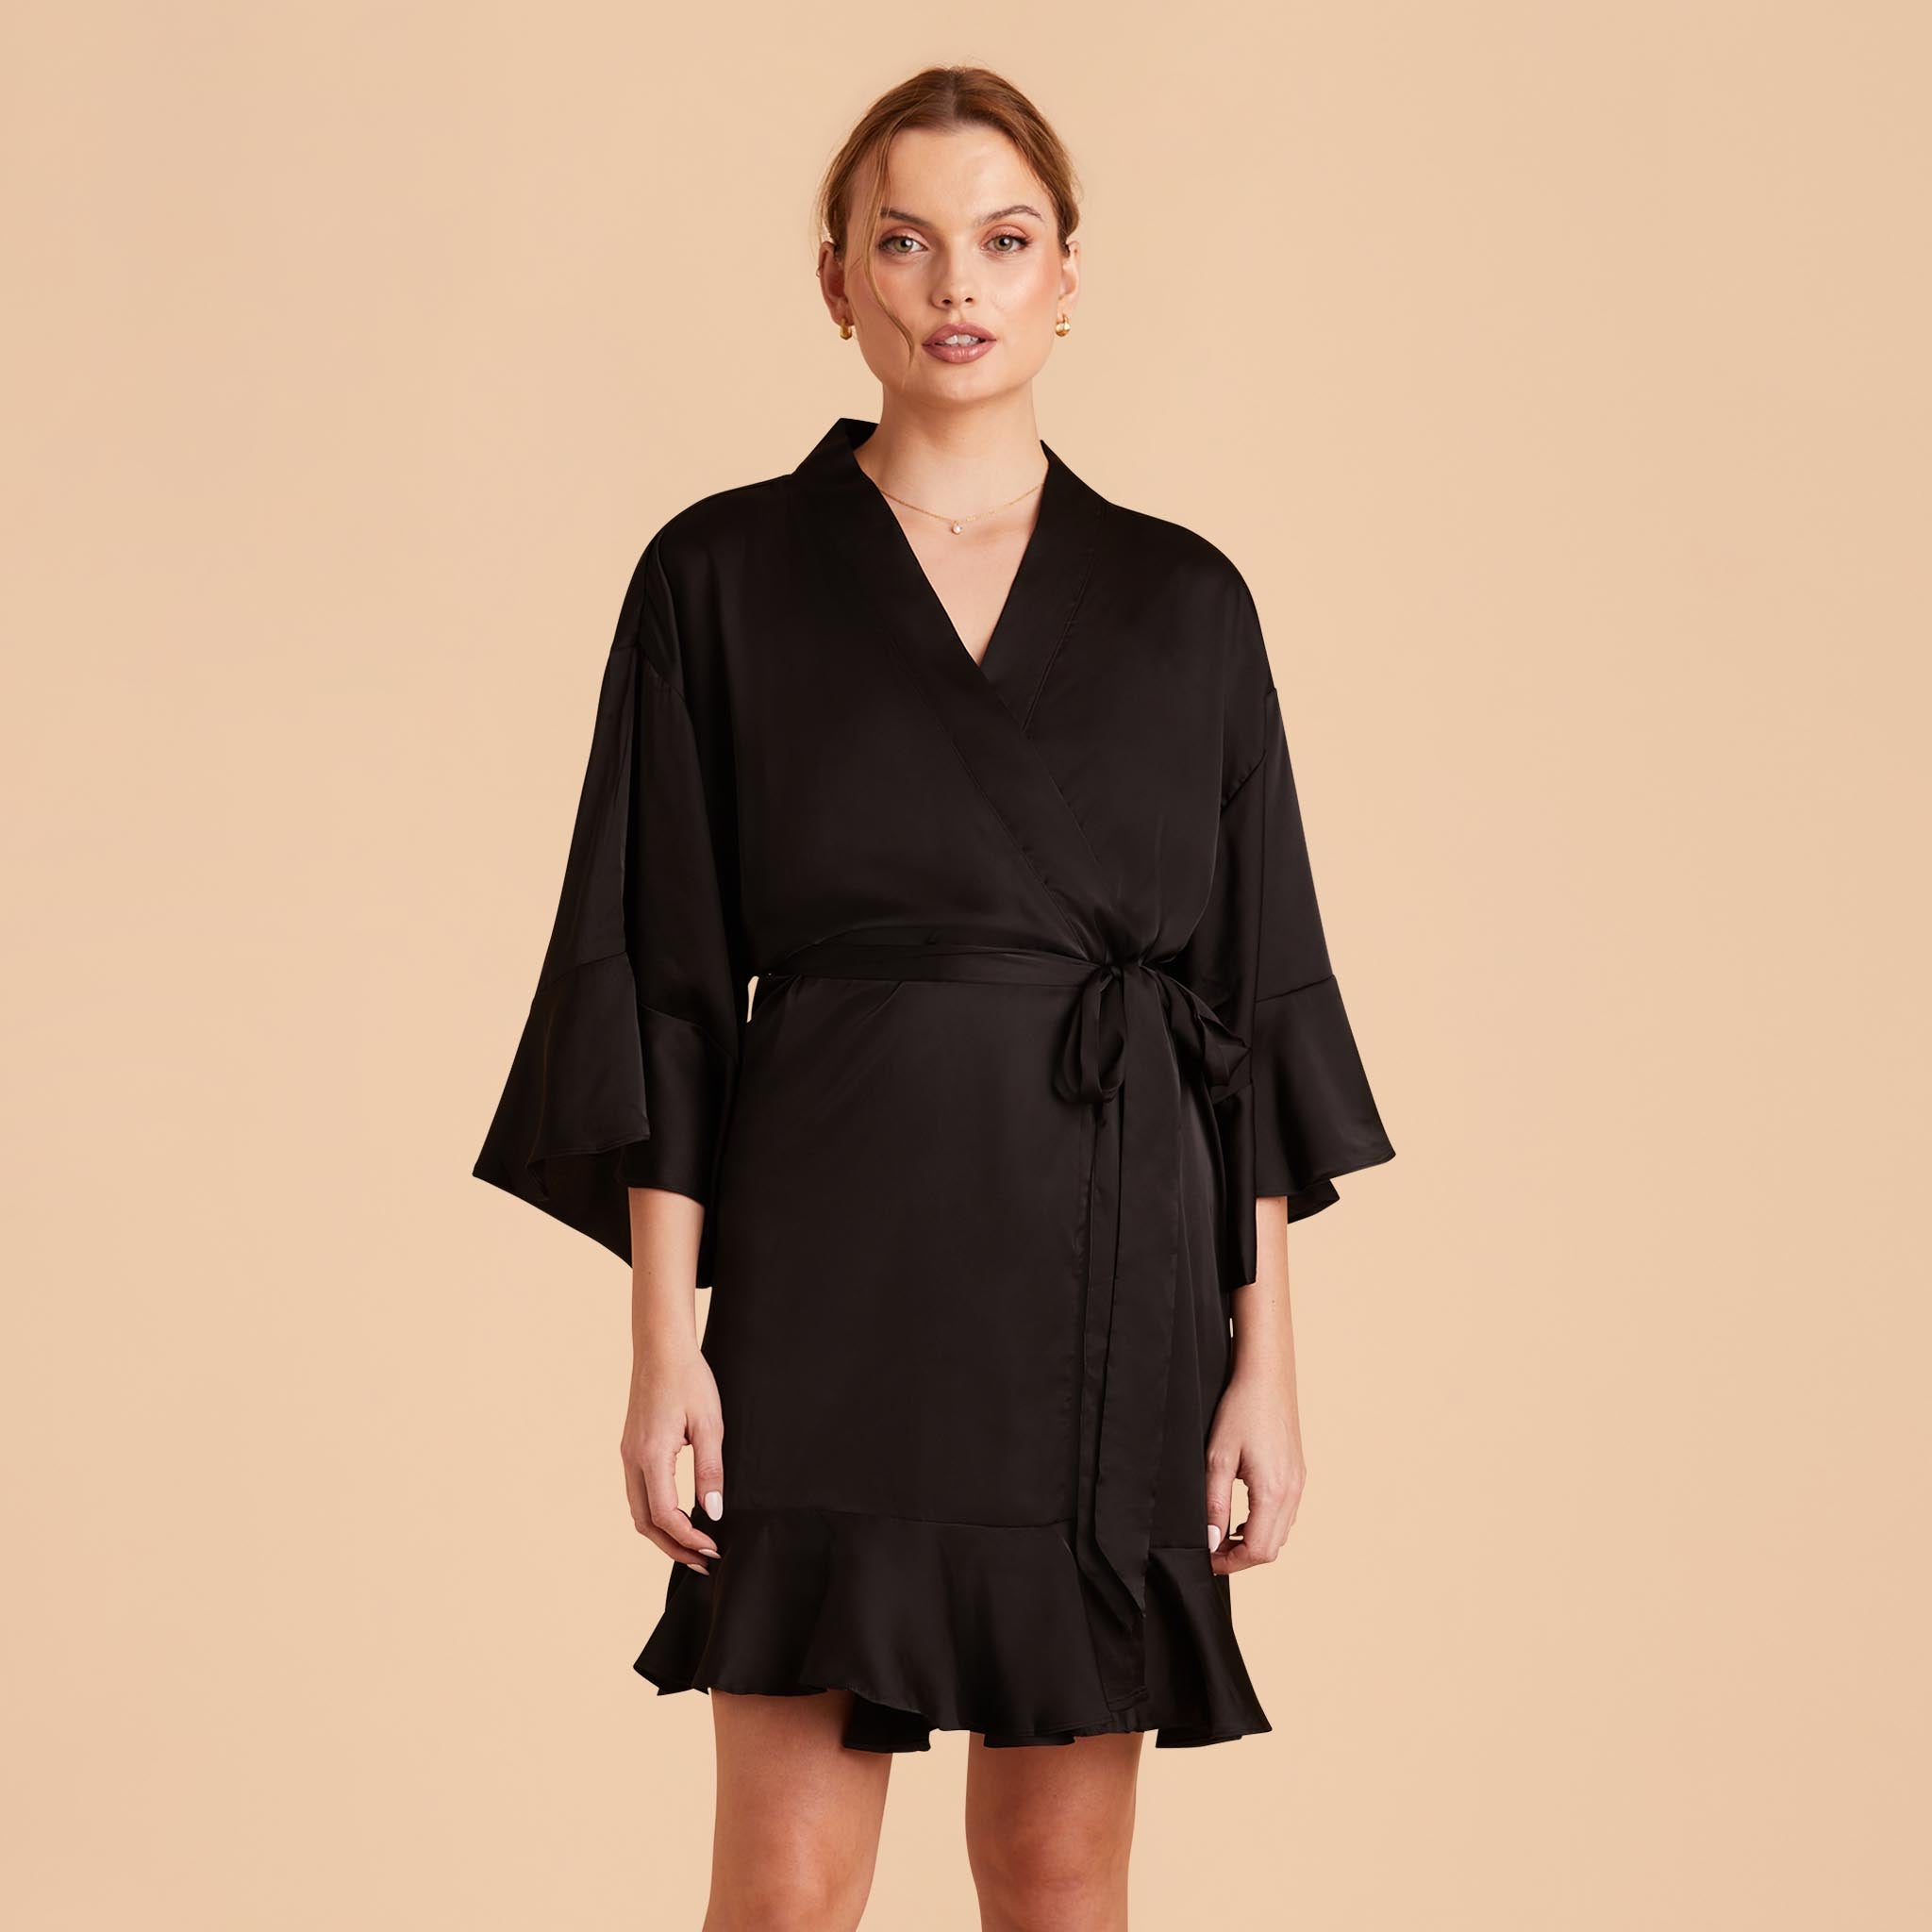 Kenny Ruffle Robe in black satin by Birdy Grey, front view